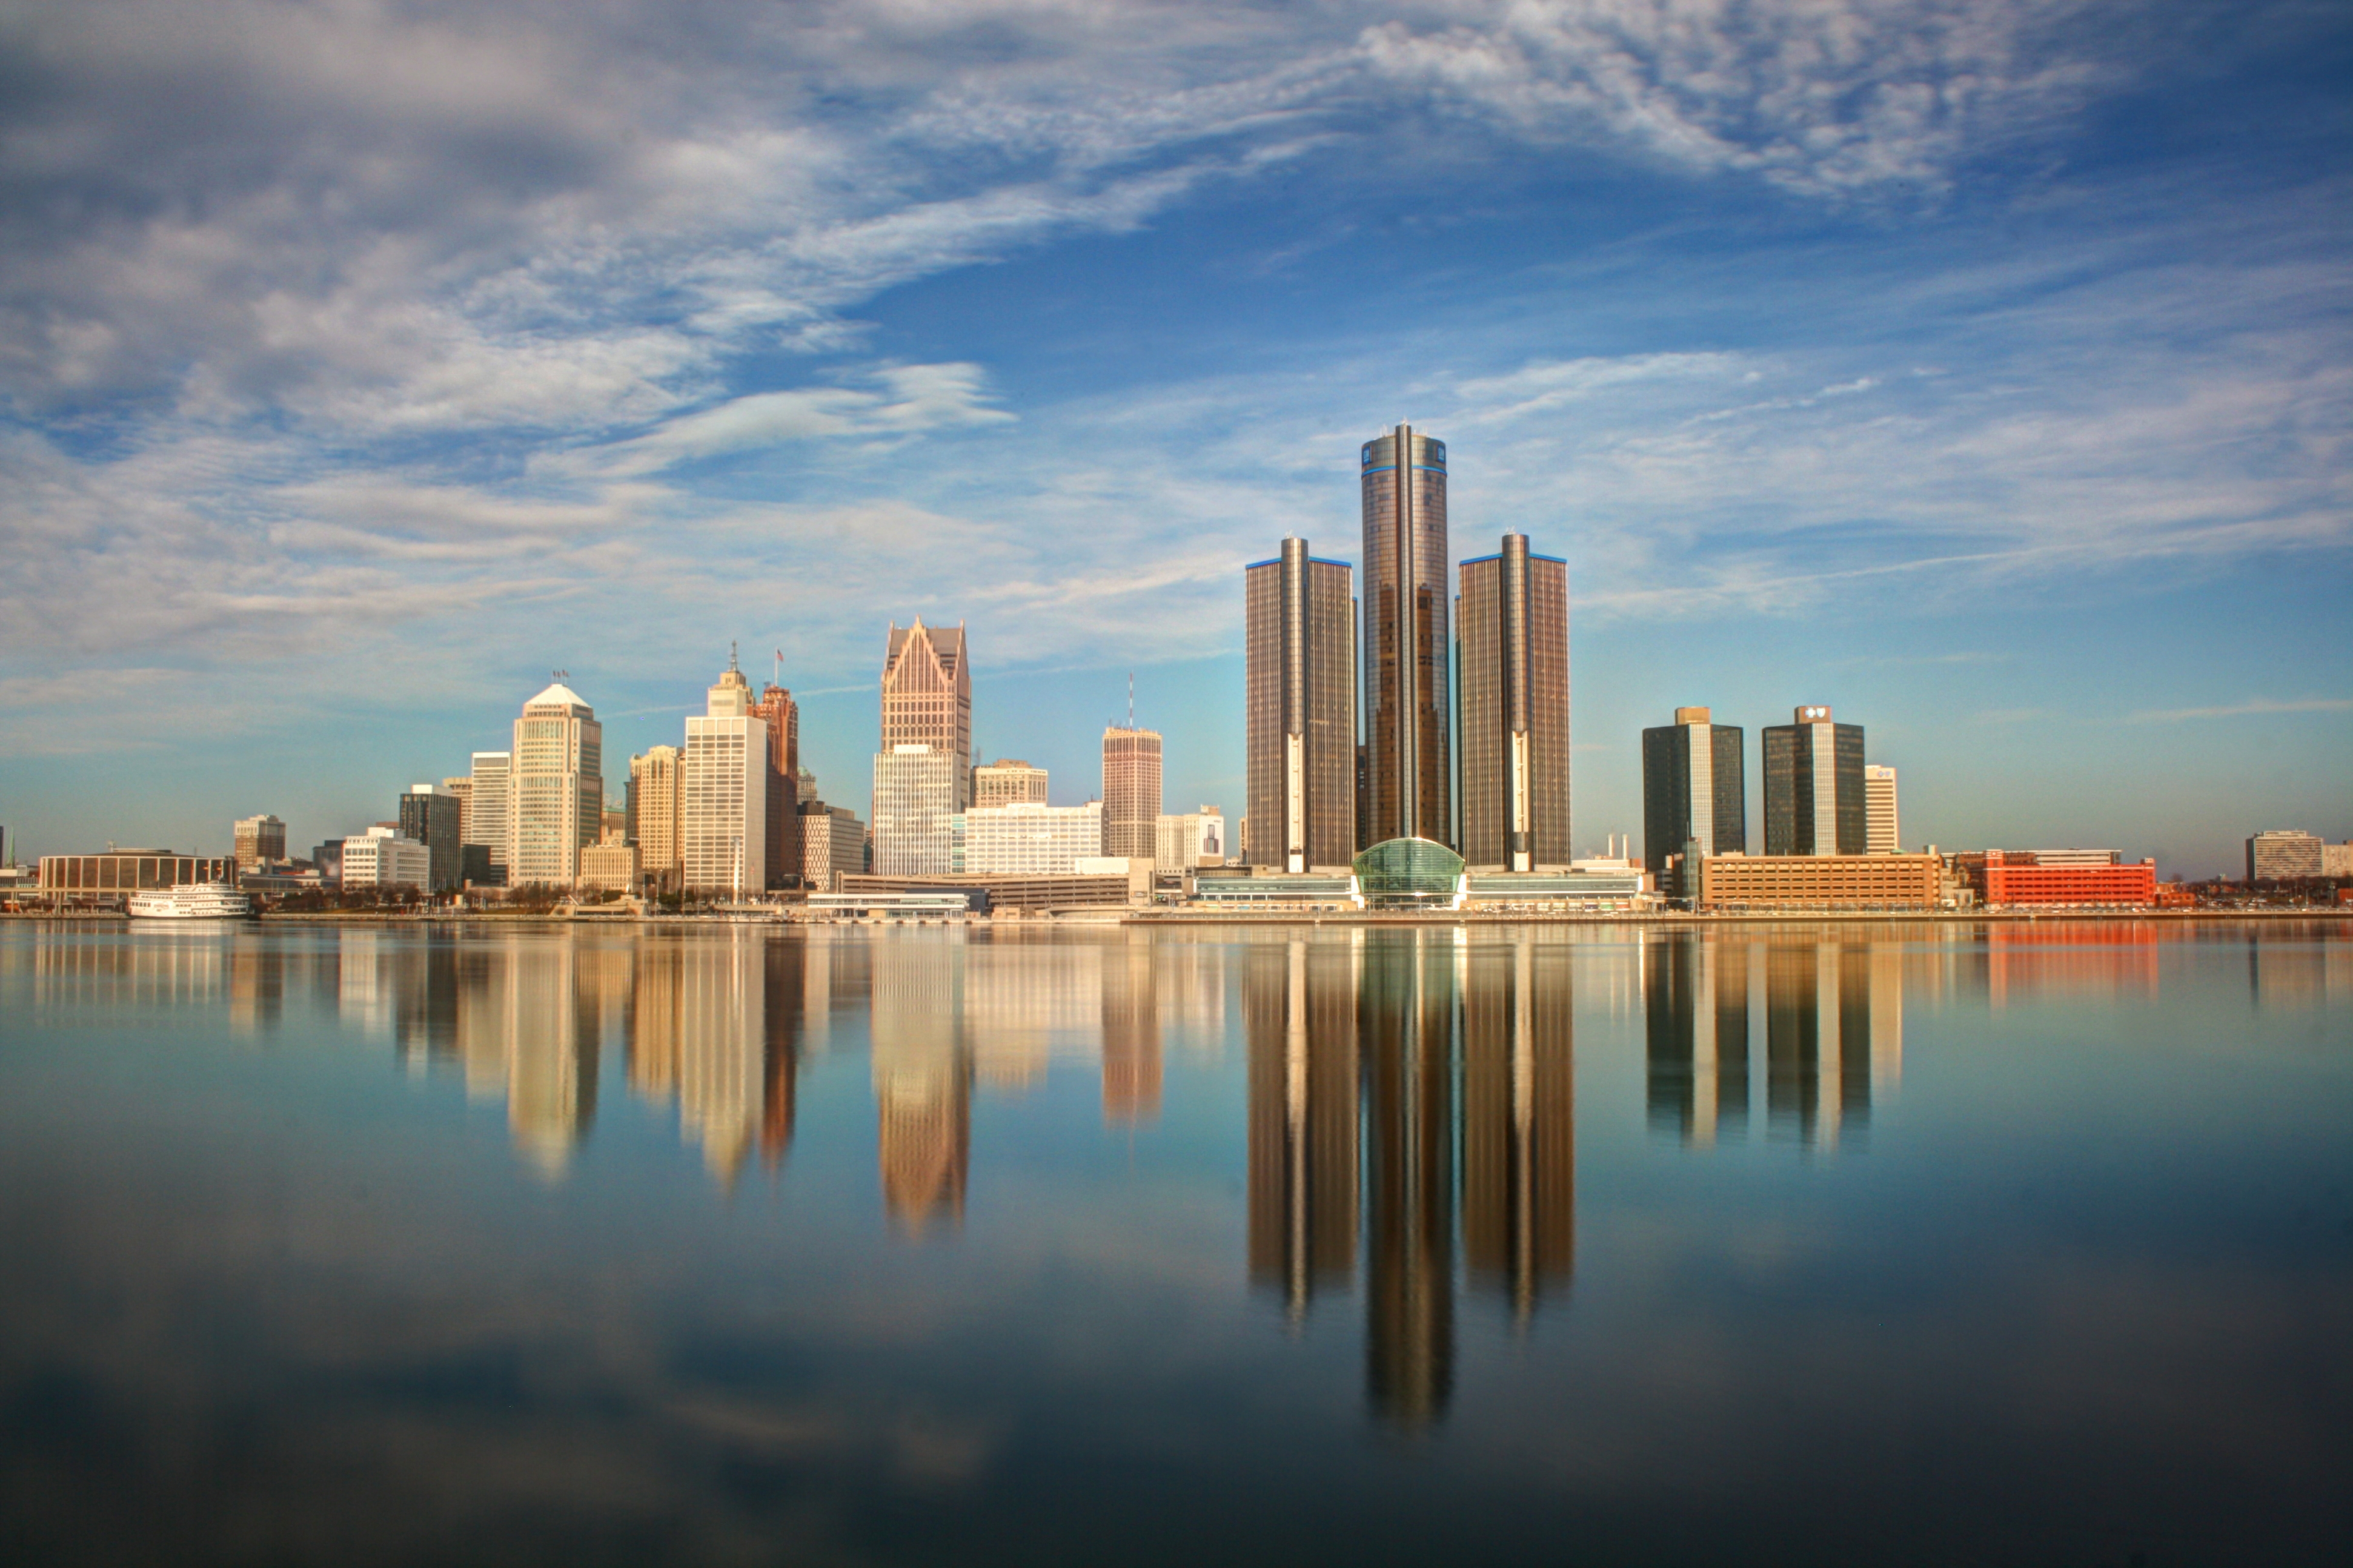 Detroit city reflection in river